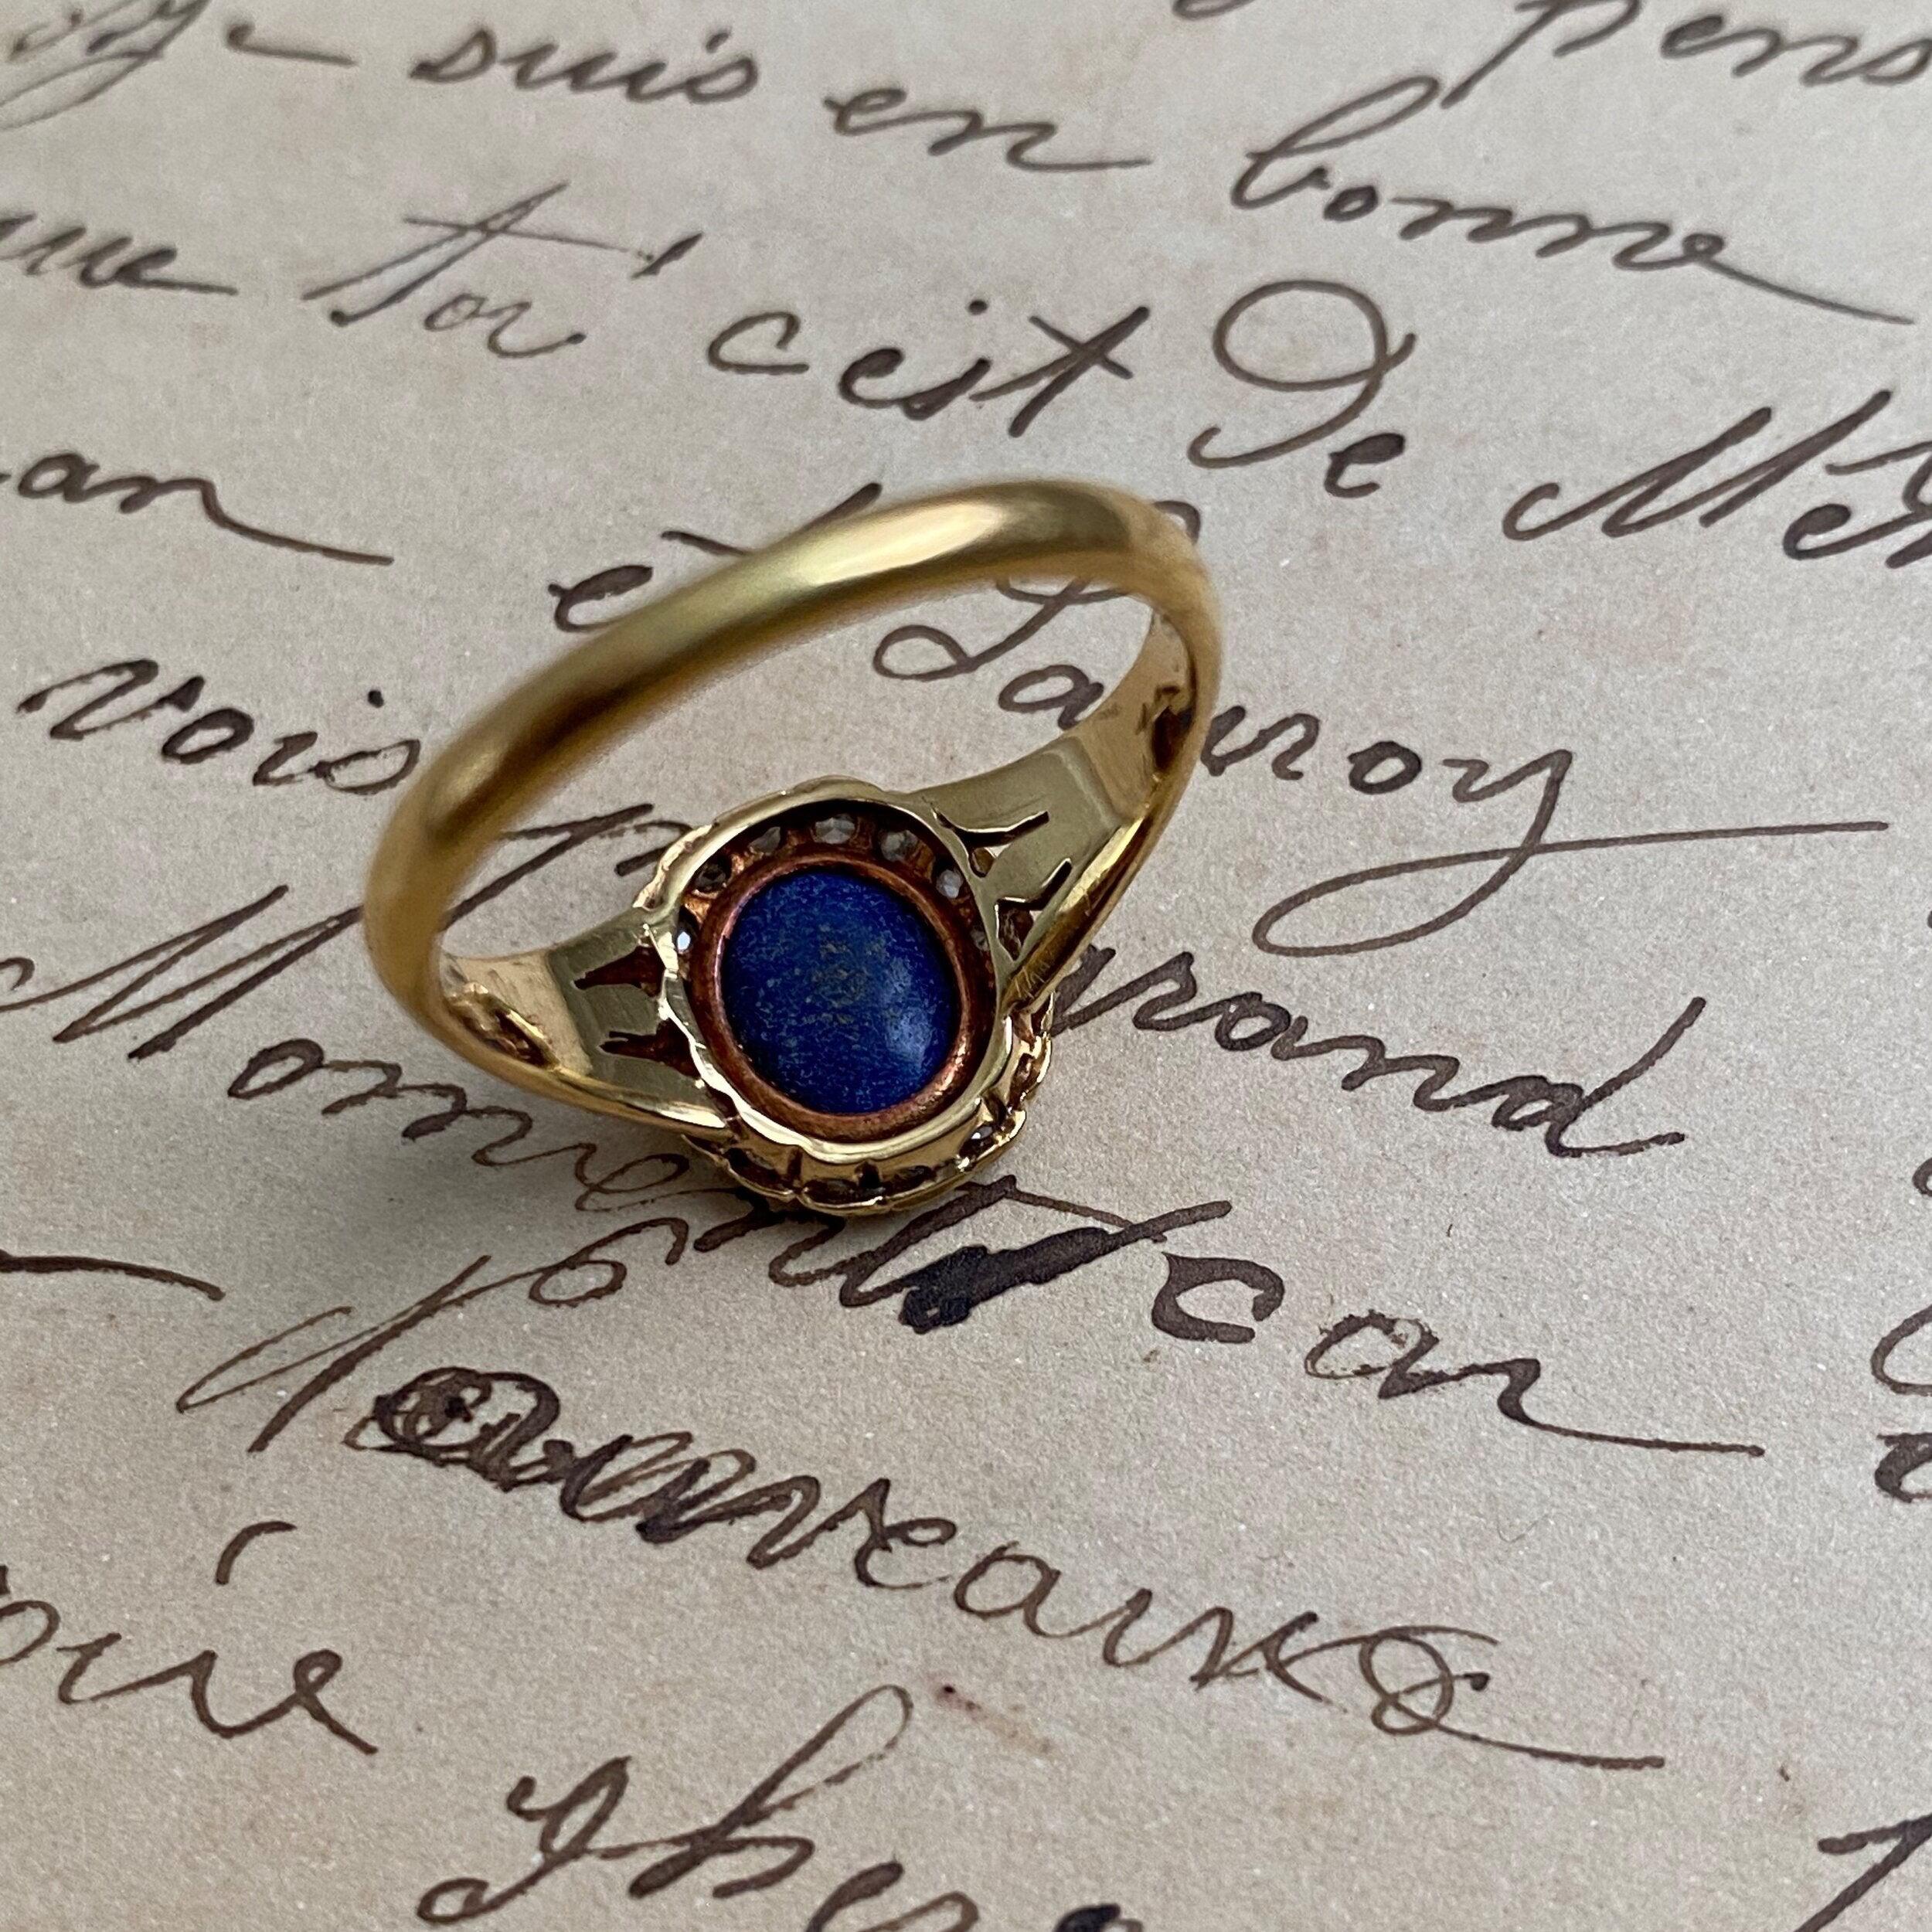 Women's or Men's Victorian 18K Lapis Intaglio Ring with Rose Cut Diamond Surround - A Cruce Salus For Sale